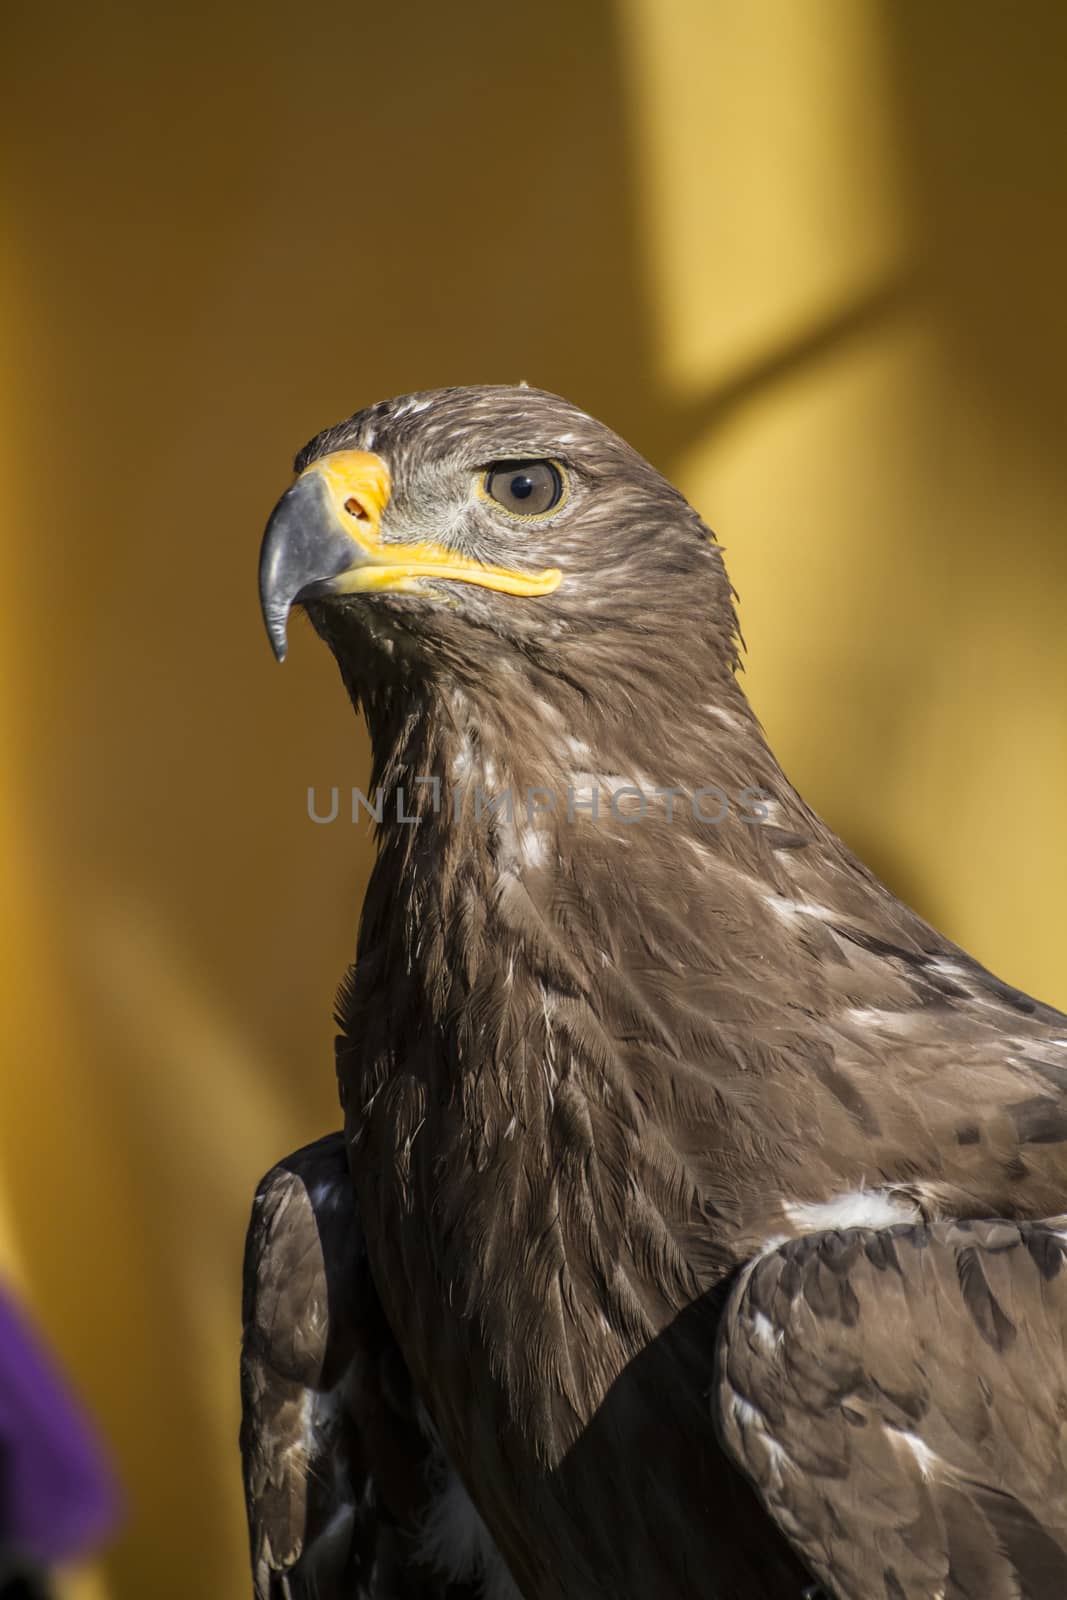 Beauty golden eagle, detail of head with large eyes, pointed beak